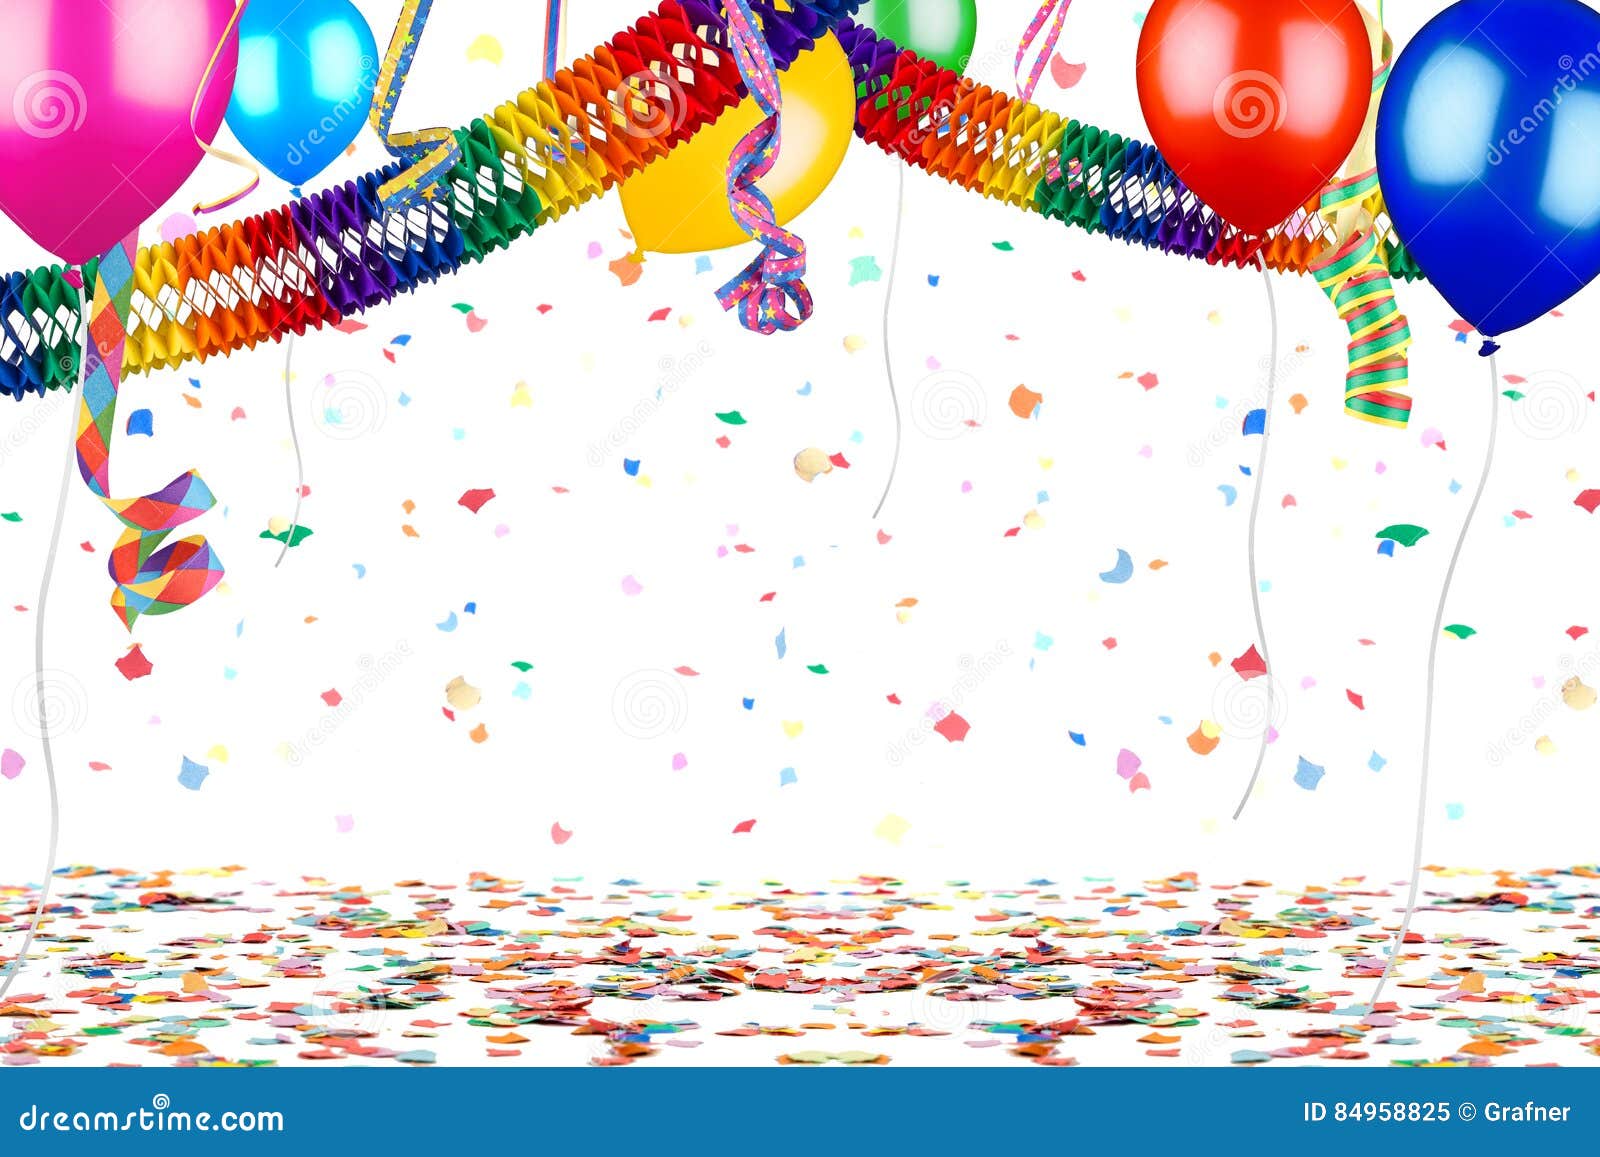 colorful party carnival birthday celebration background